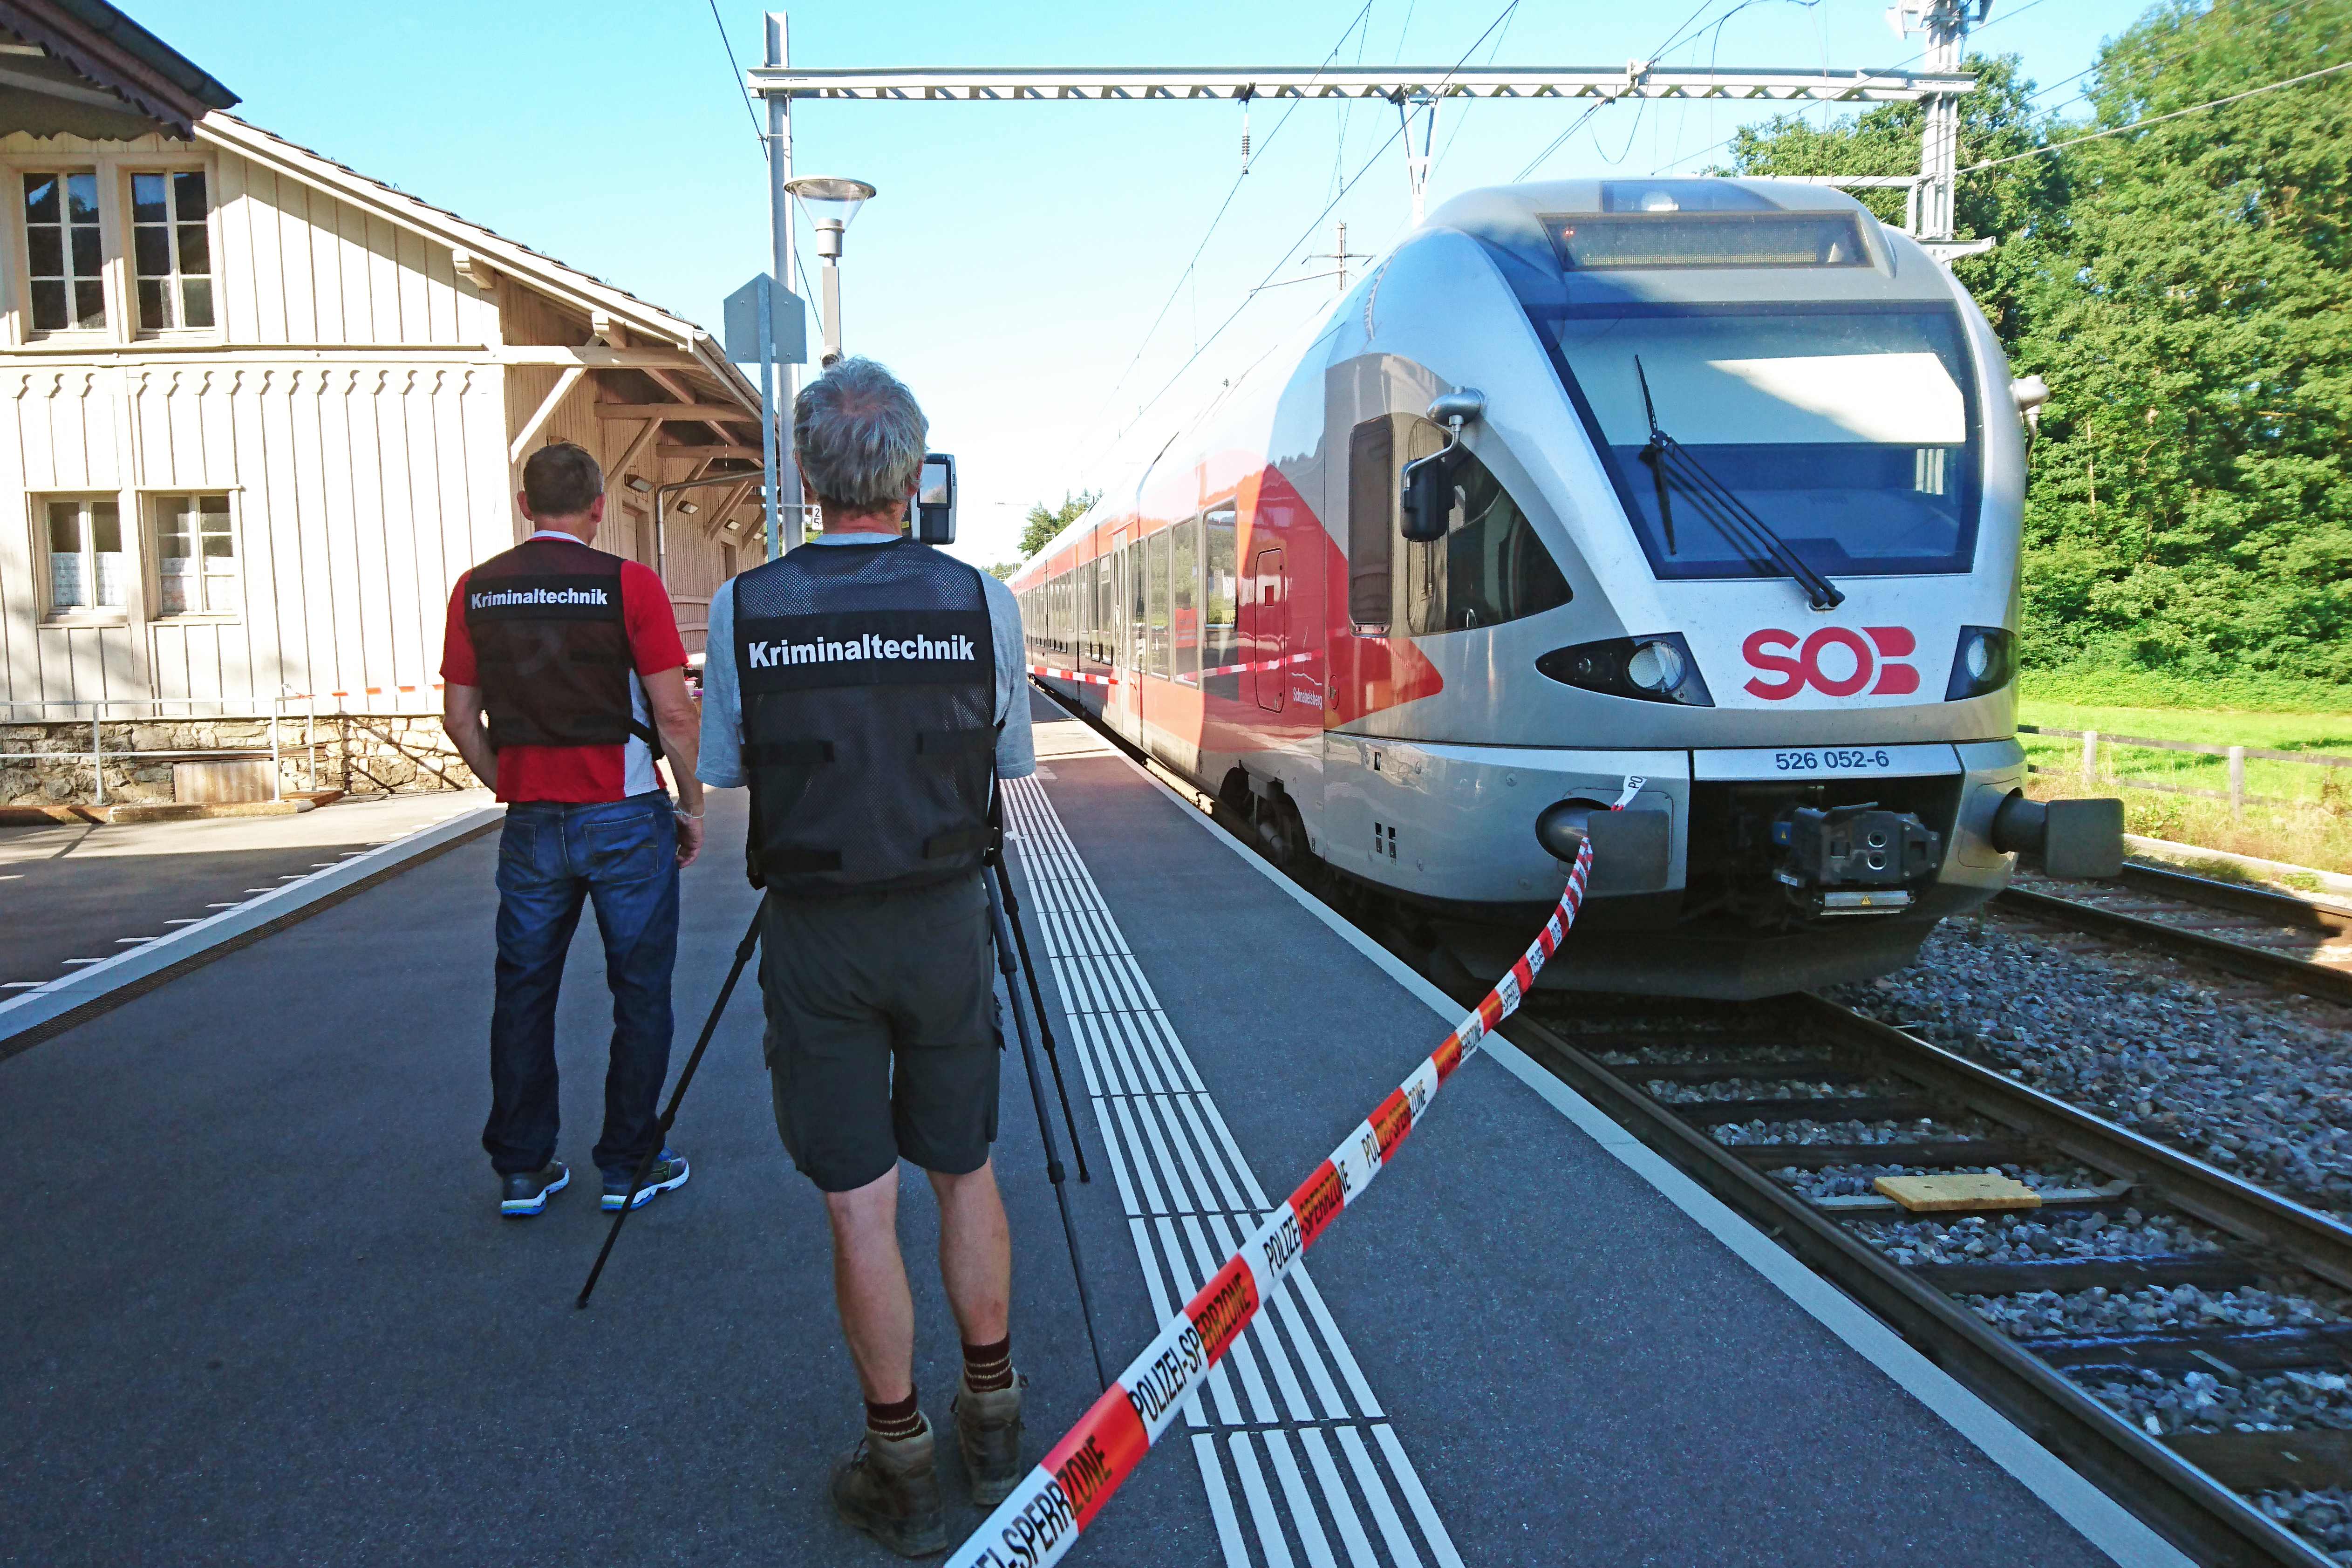 Man with knife, flammable liquid injures 6 on Swiss train